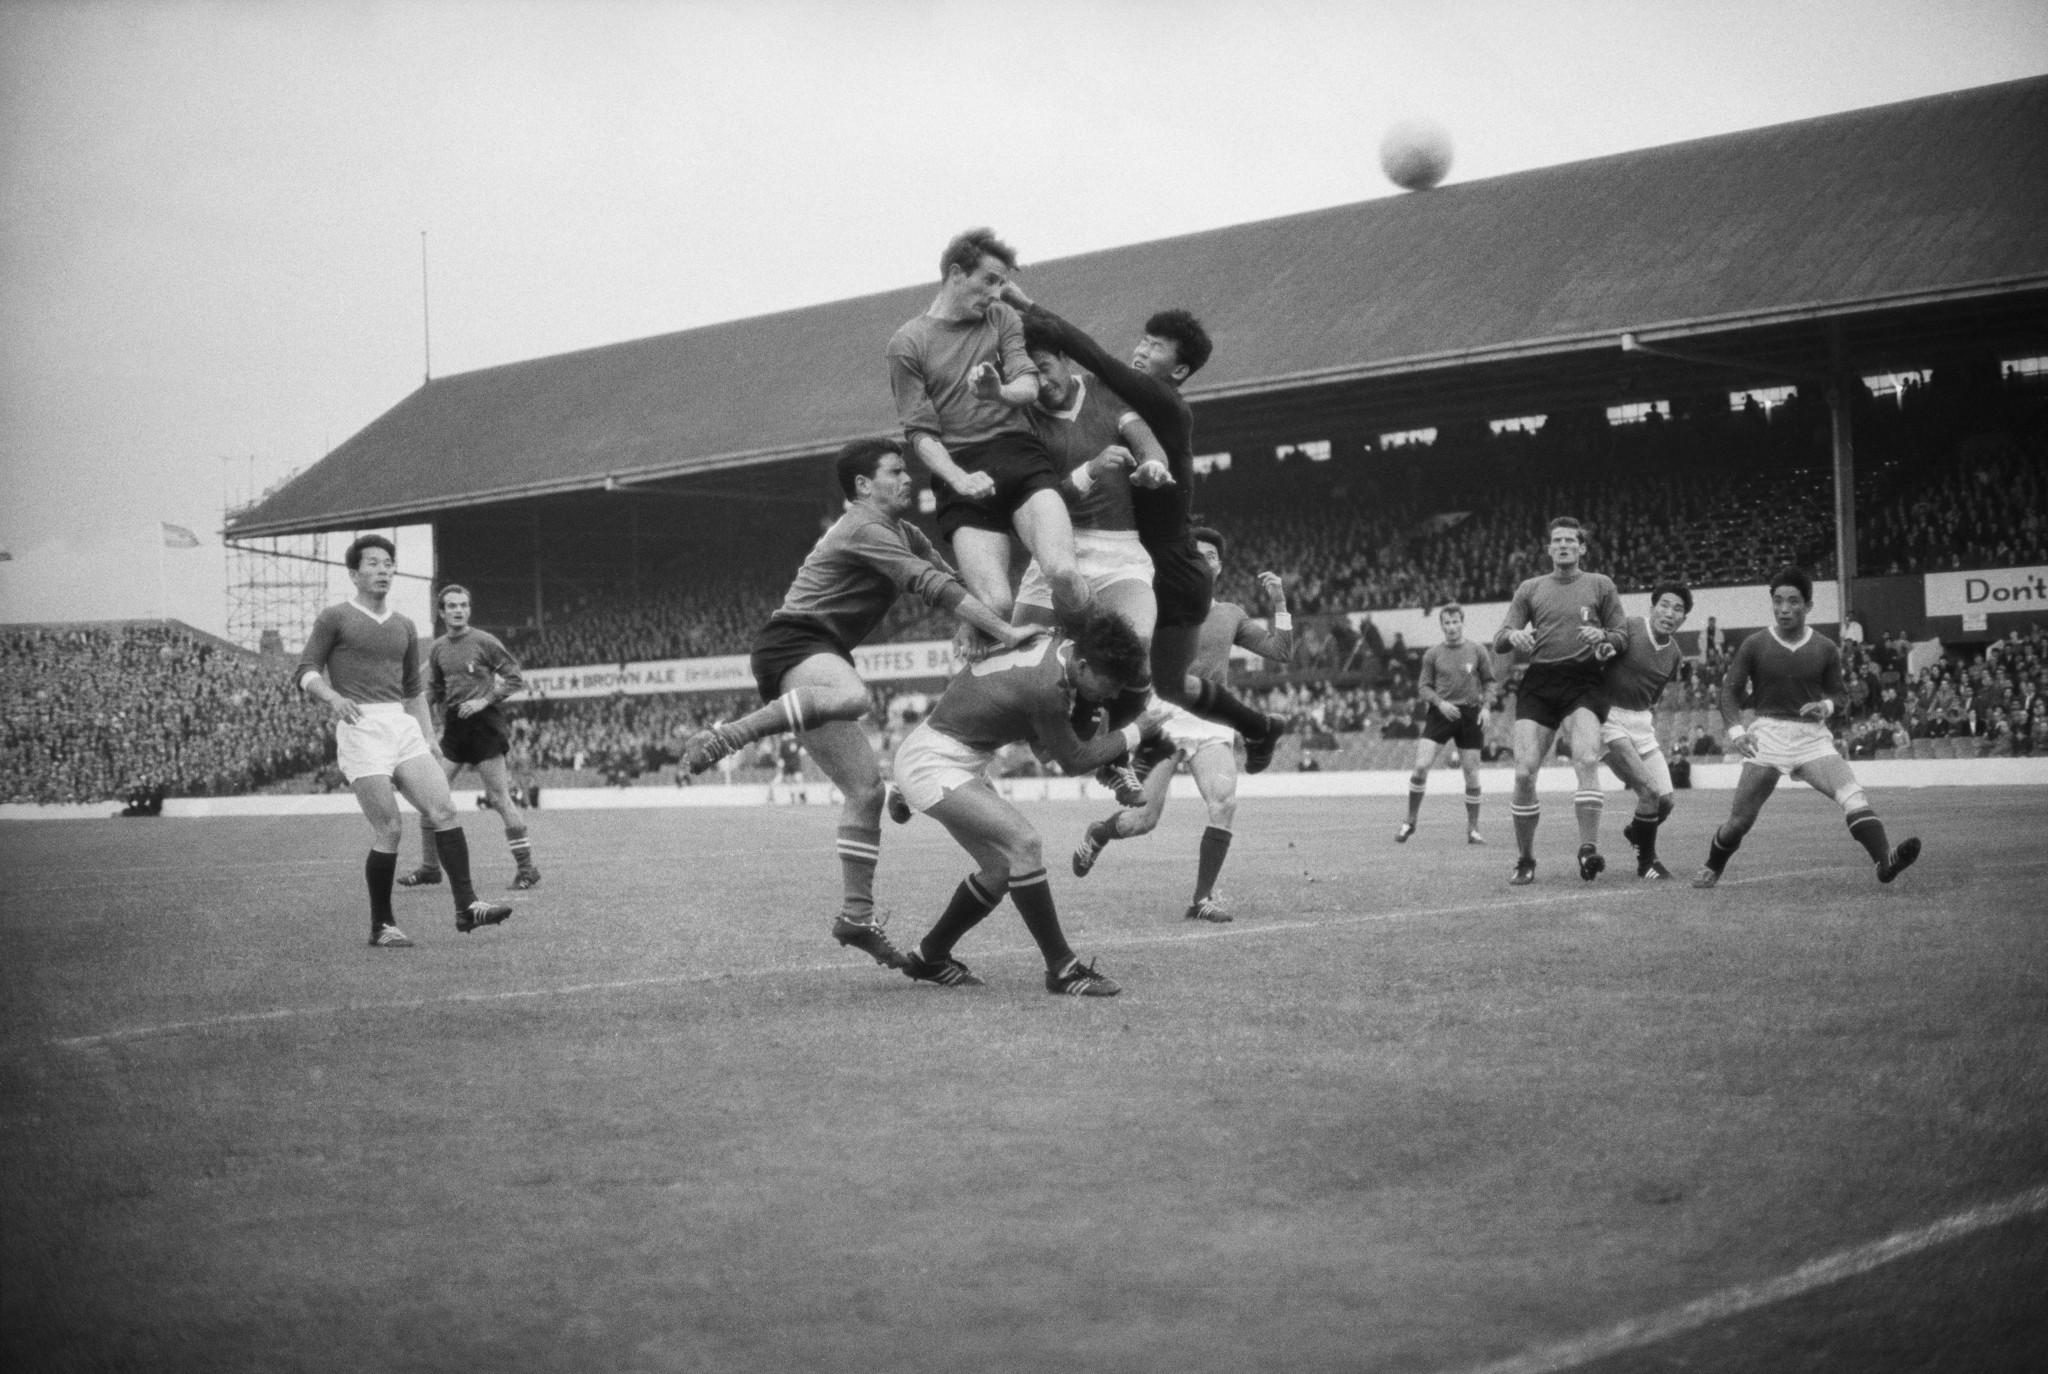 North Korea beat Italy 1-0 at Middlesbrough at the 1966 FIFA World Cup, which is considered one of the biggest upsets in the tournament's history ©Getty Images